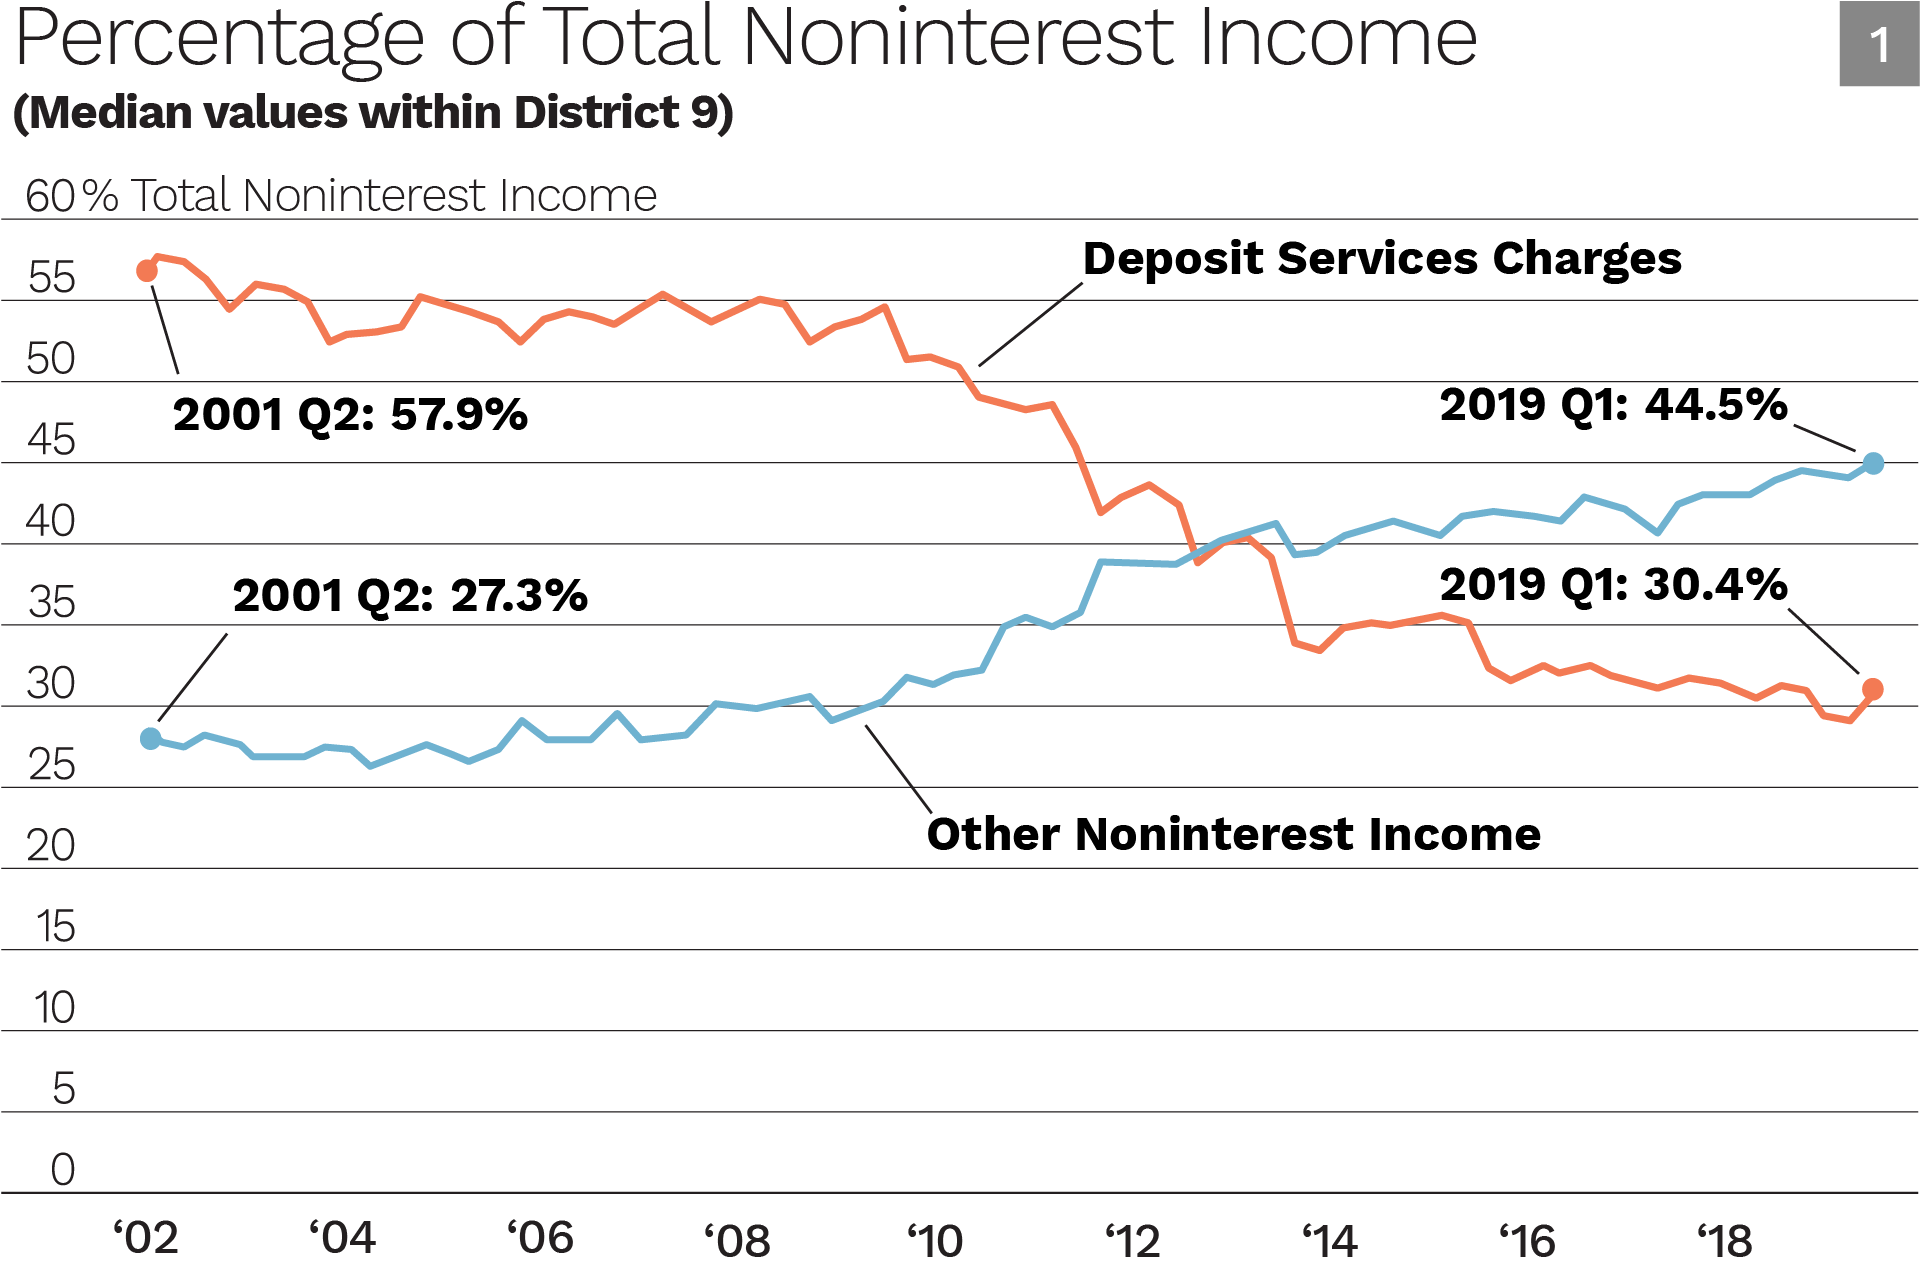 Percentage of Total Noninterest Income